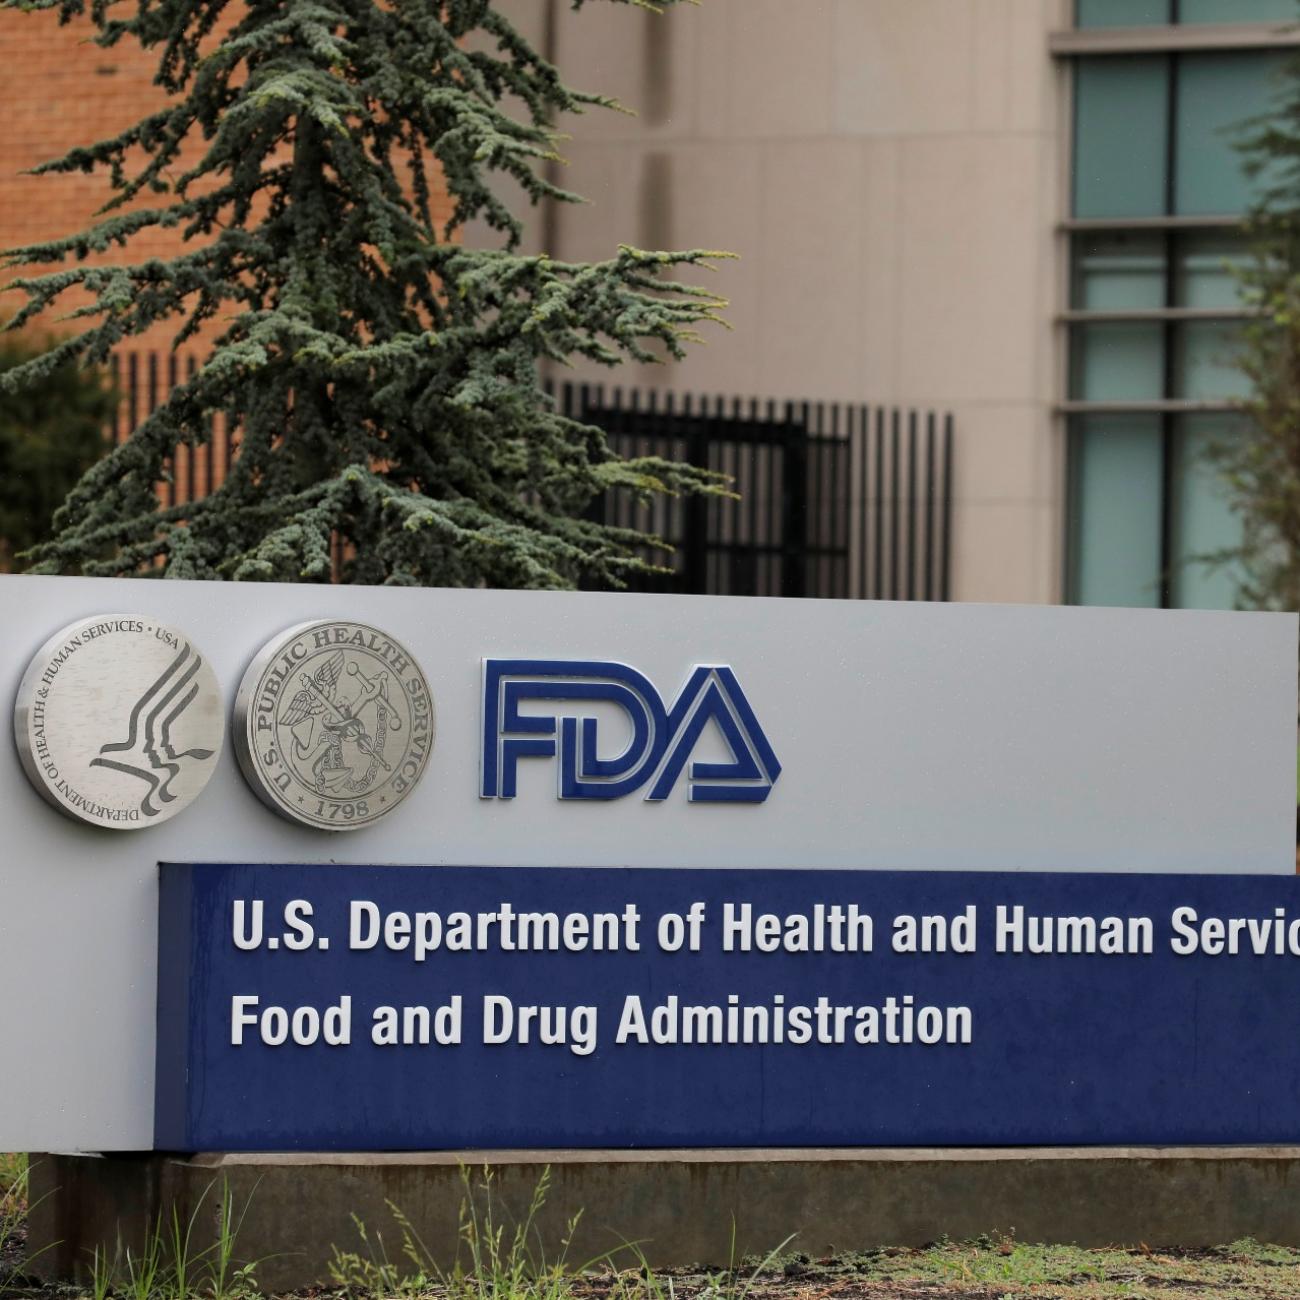 A blue and silver sign that reads "FDA: U.S. Department of Health and Human Services Food and Drug Administration" is seen in the lawn outside the FDA building in Maryland